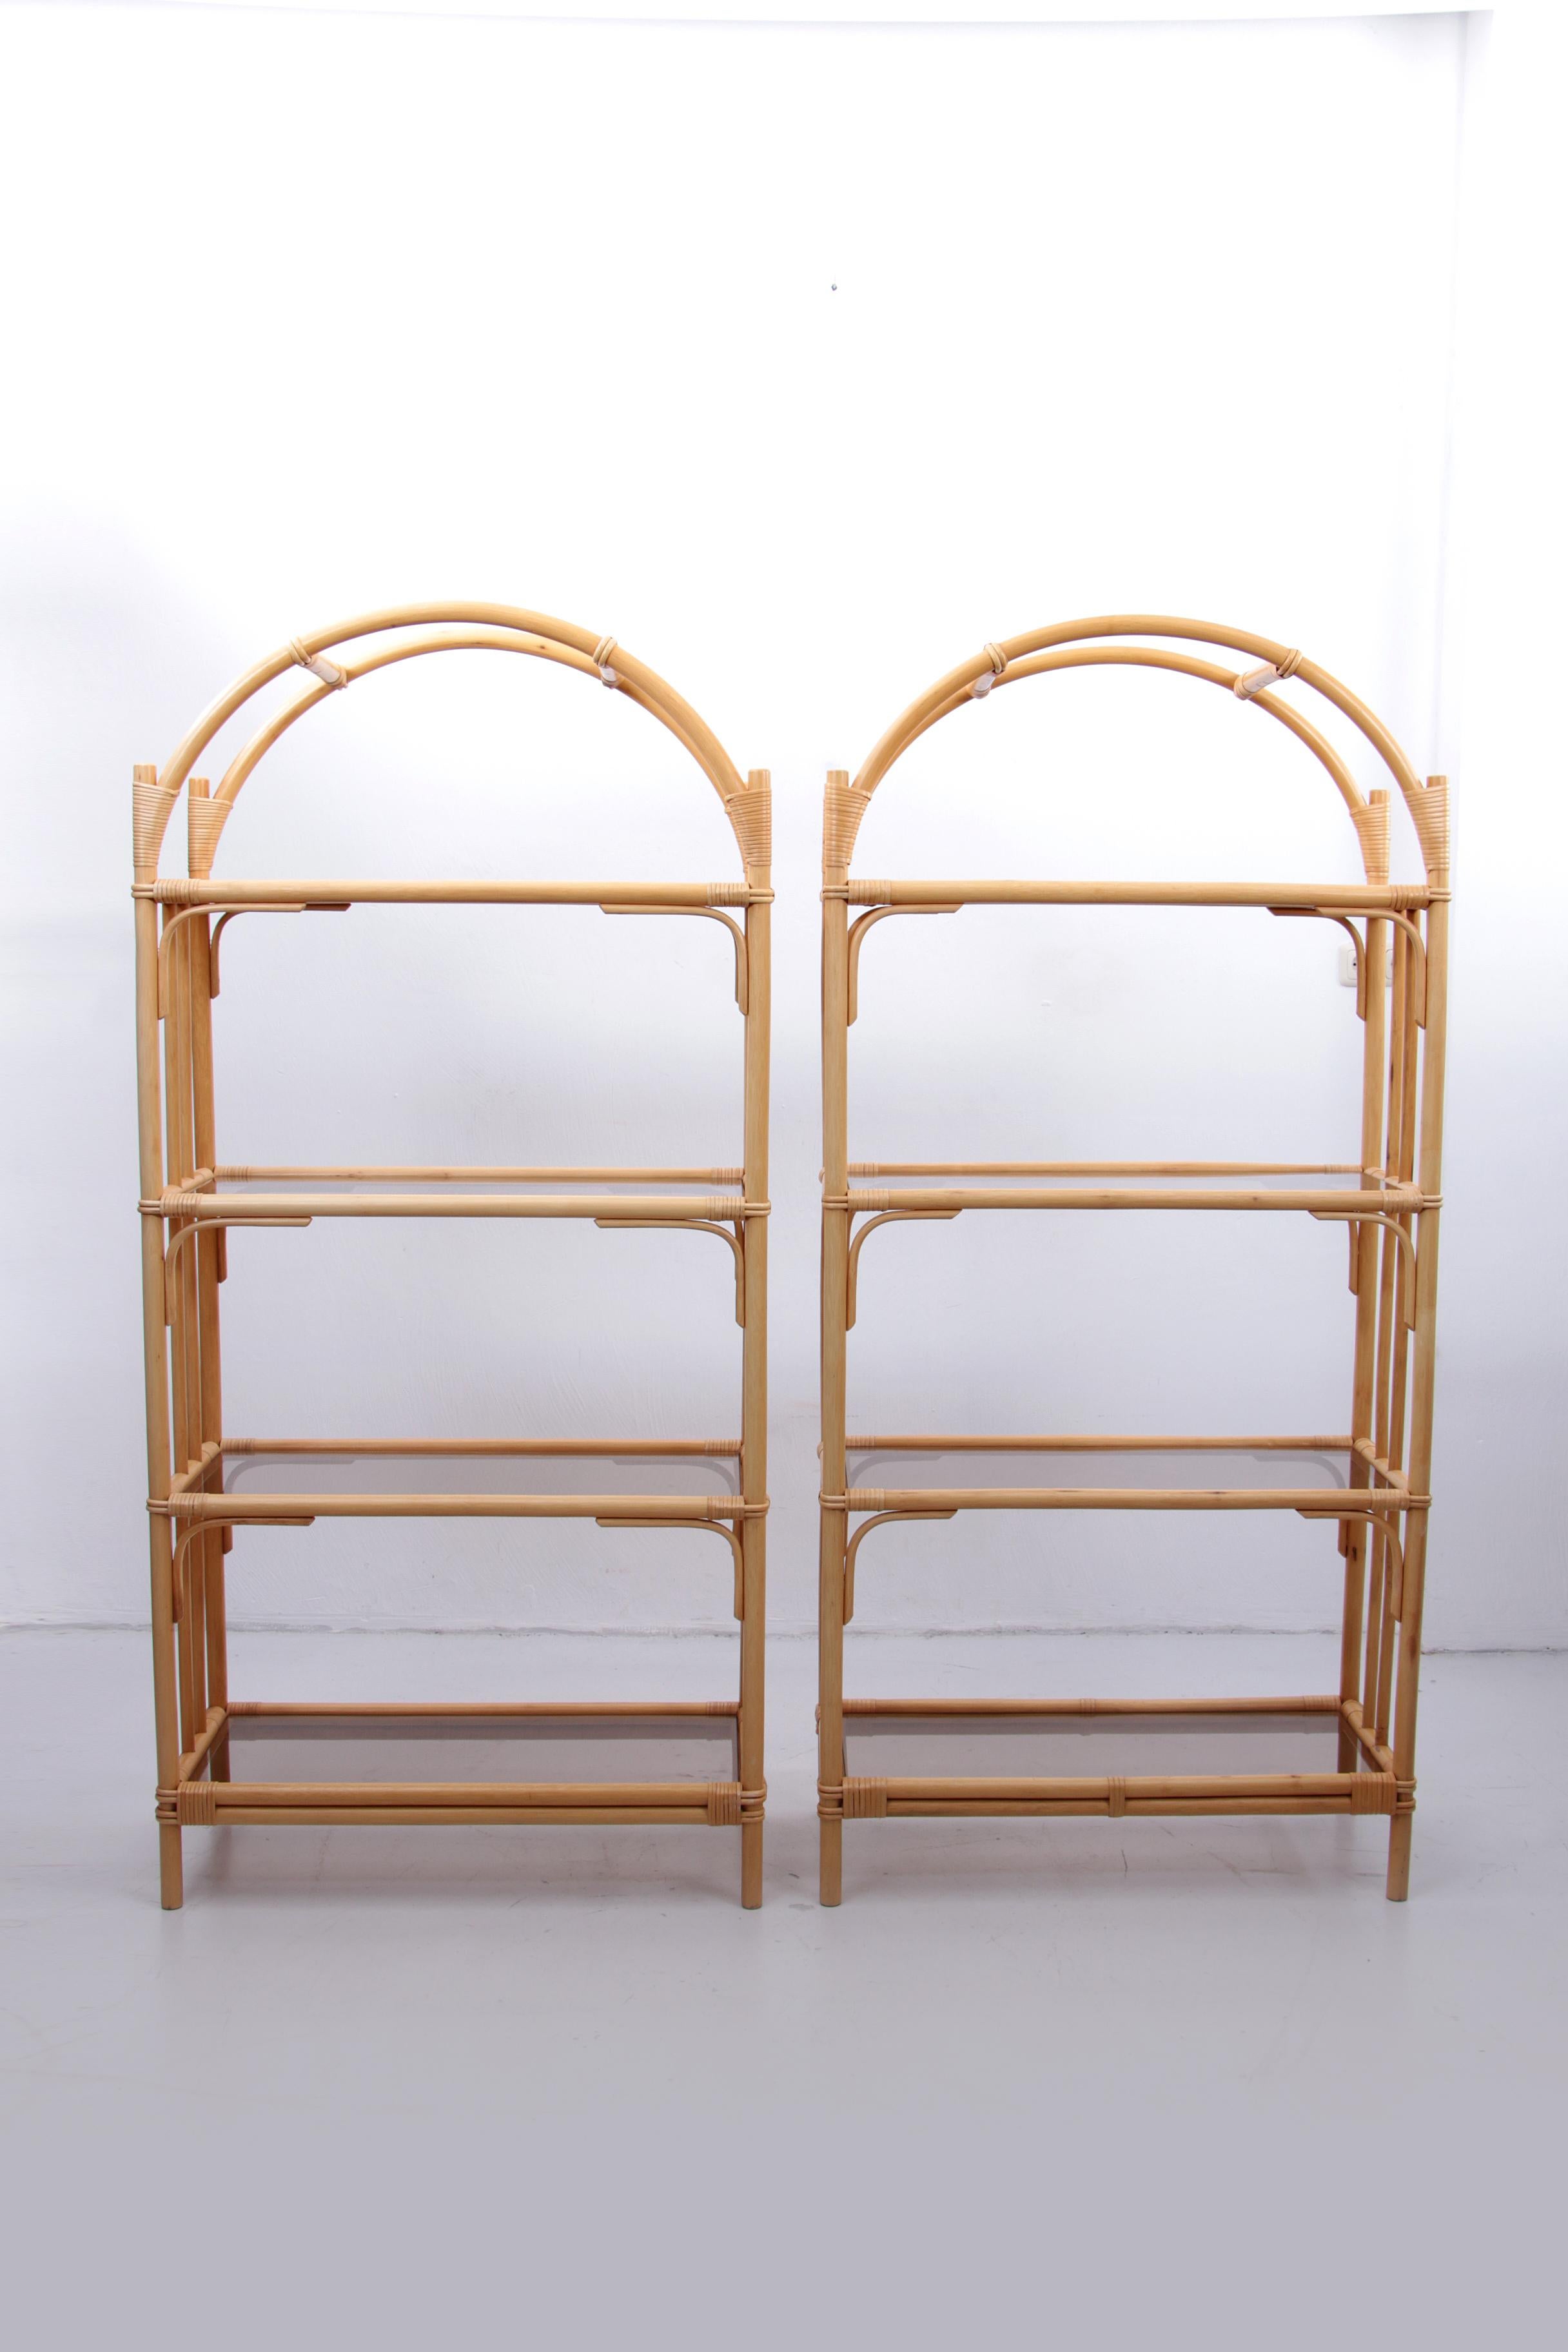 Late 20th Century Large Bamboo Wall Unit with Bamboo Arches and Dark Glass, Denmark